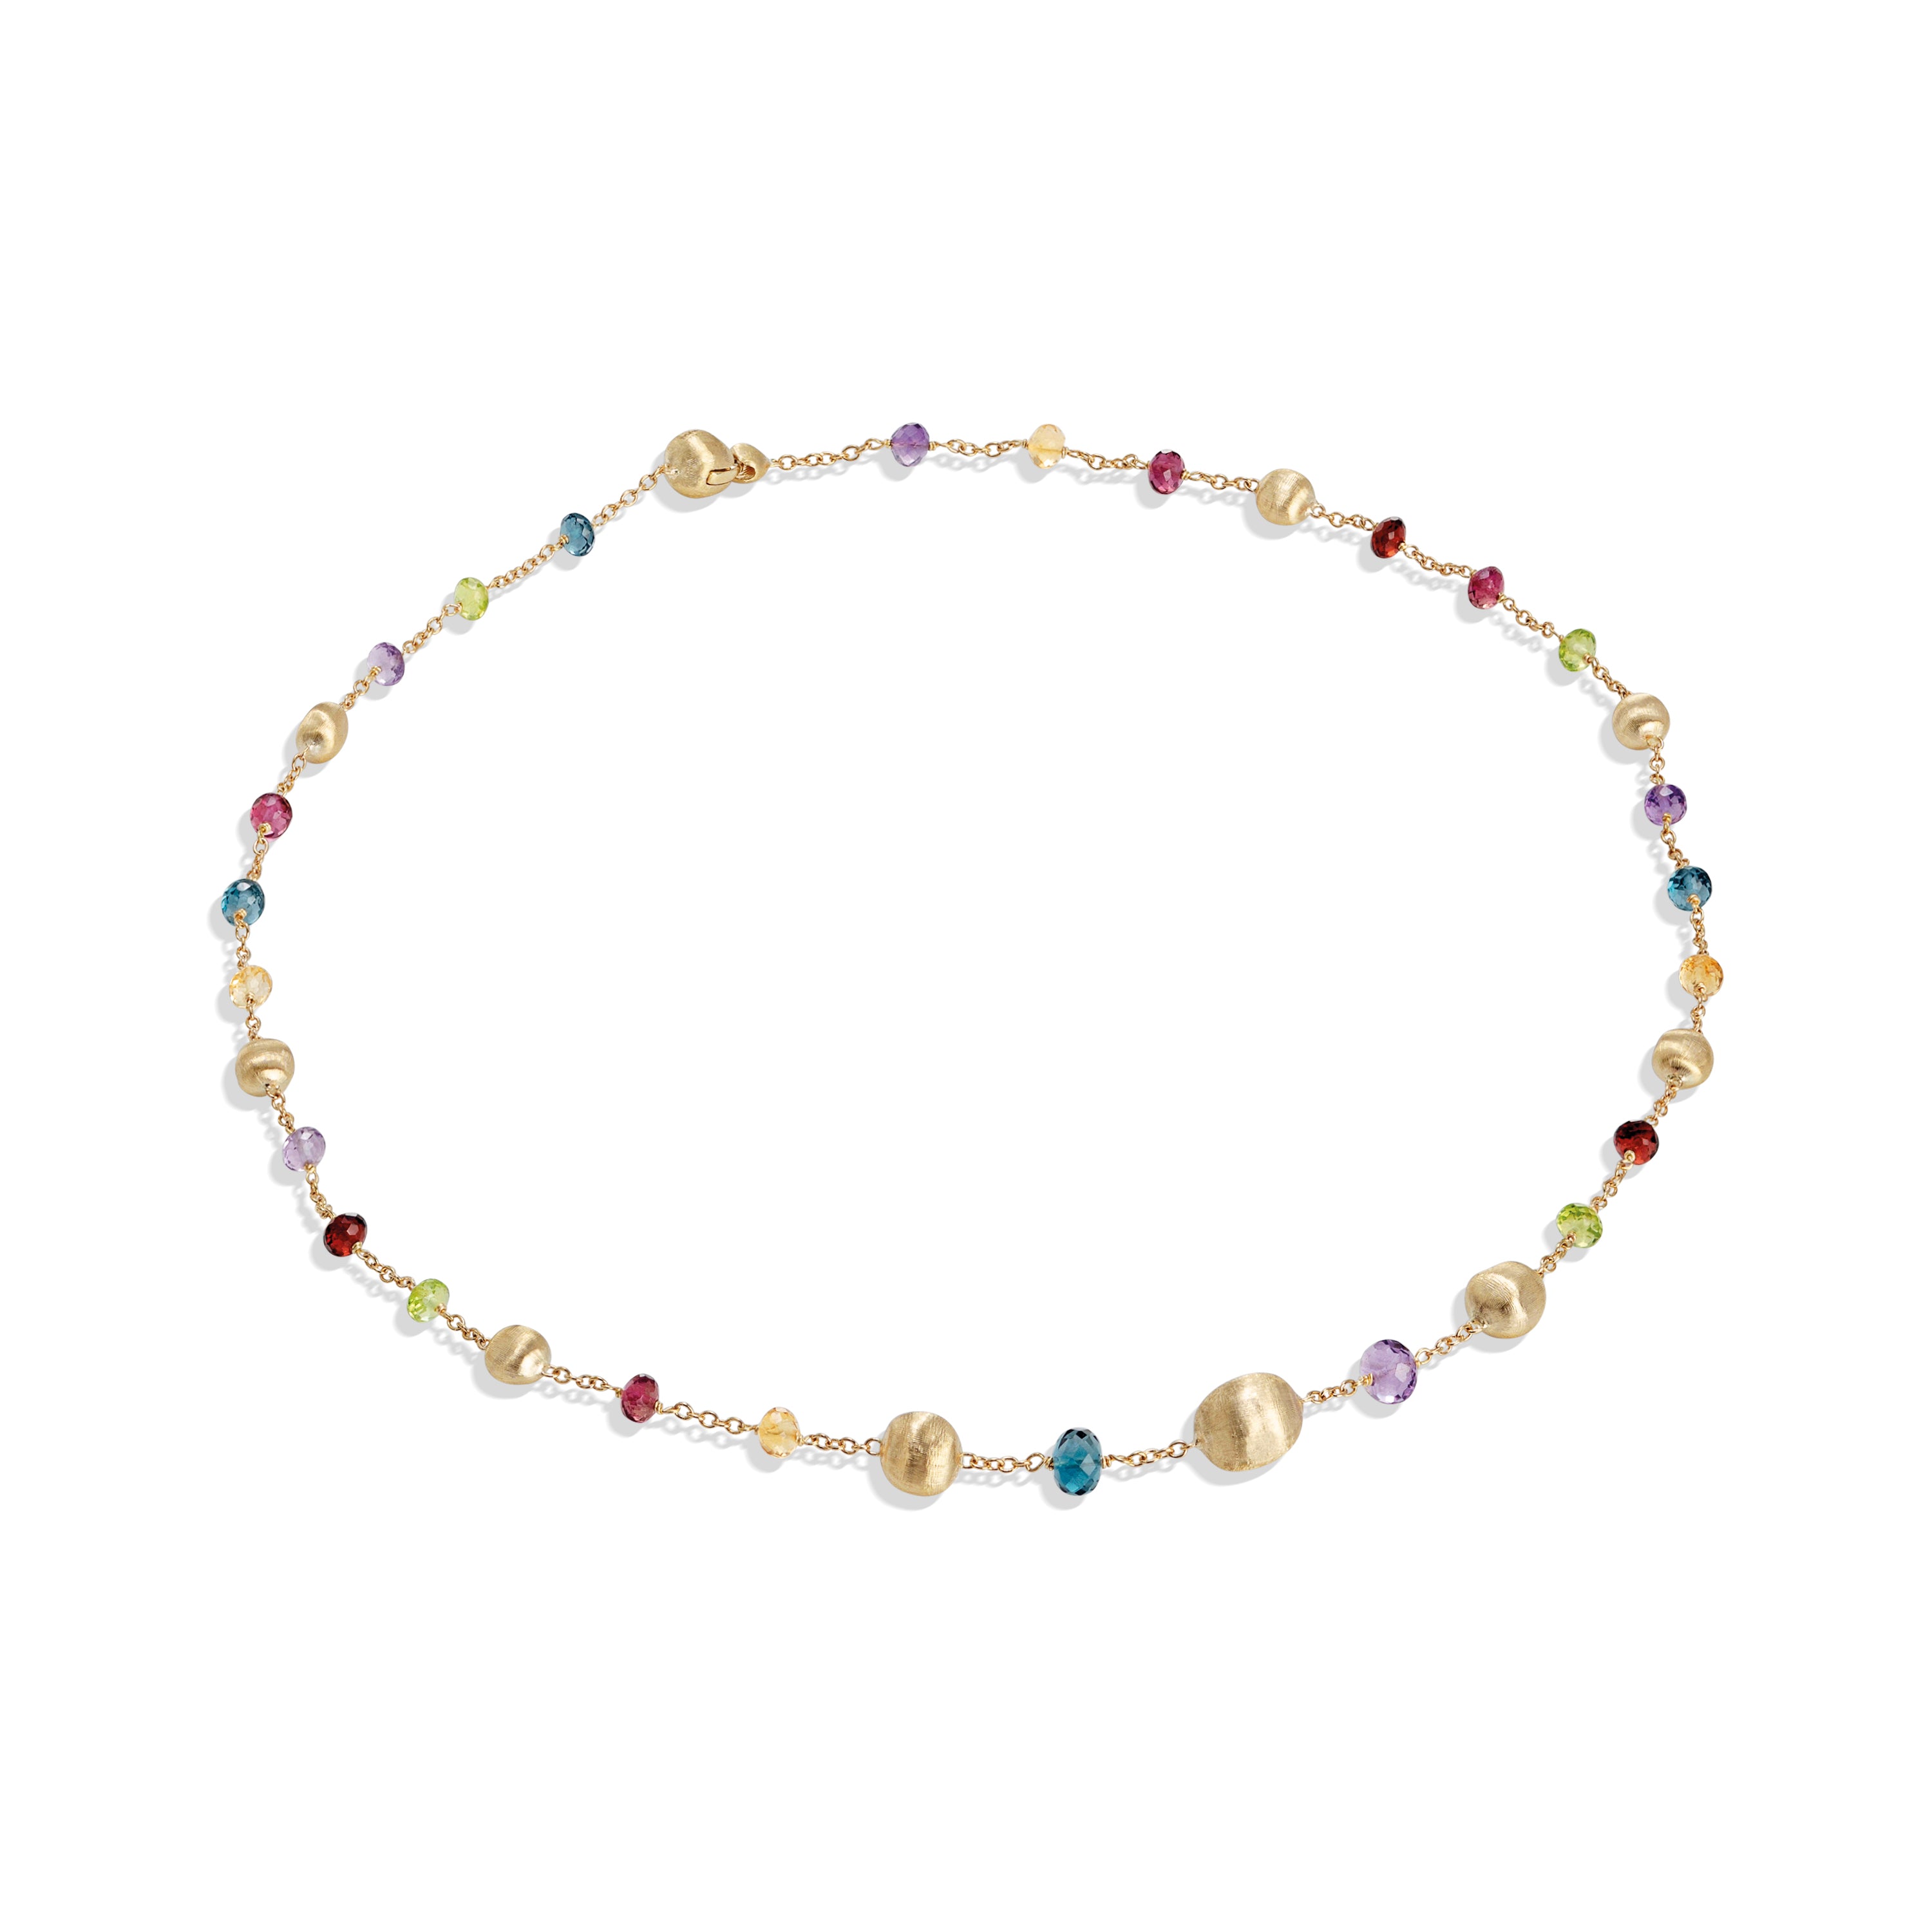 18K YELLOW GOLD MIXED GEMSTONE NECKLACE FROM THE AFRICA COLLECTION